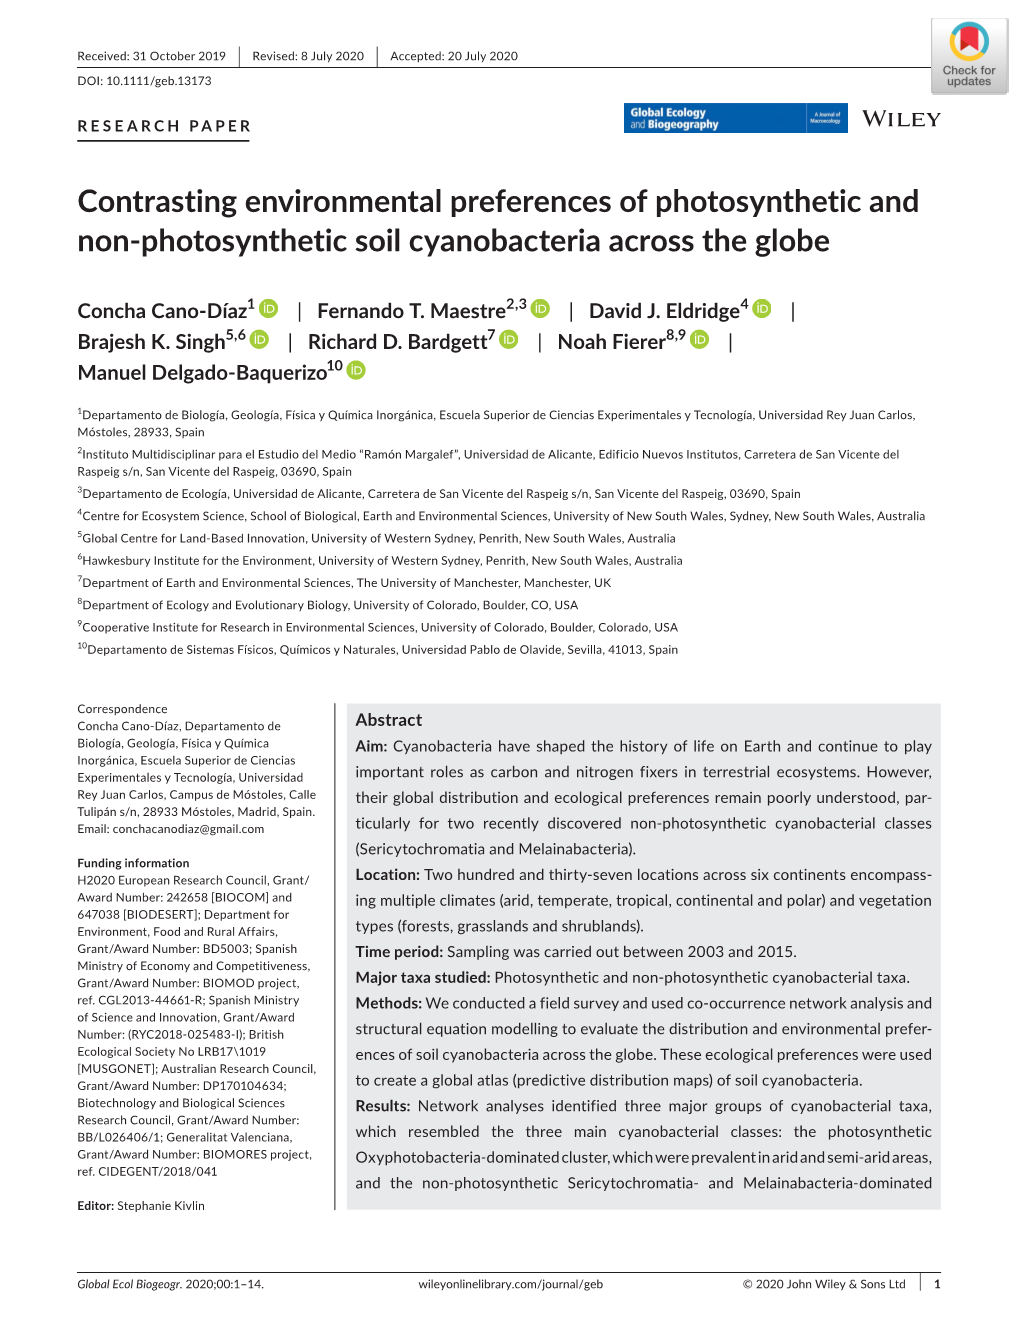 Contrasting Environmental Preferences of Photosynthetic and Non-Photosynthetic Soil Cyanobacteria Across the Globe